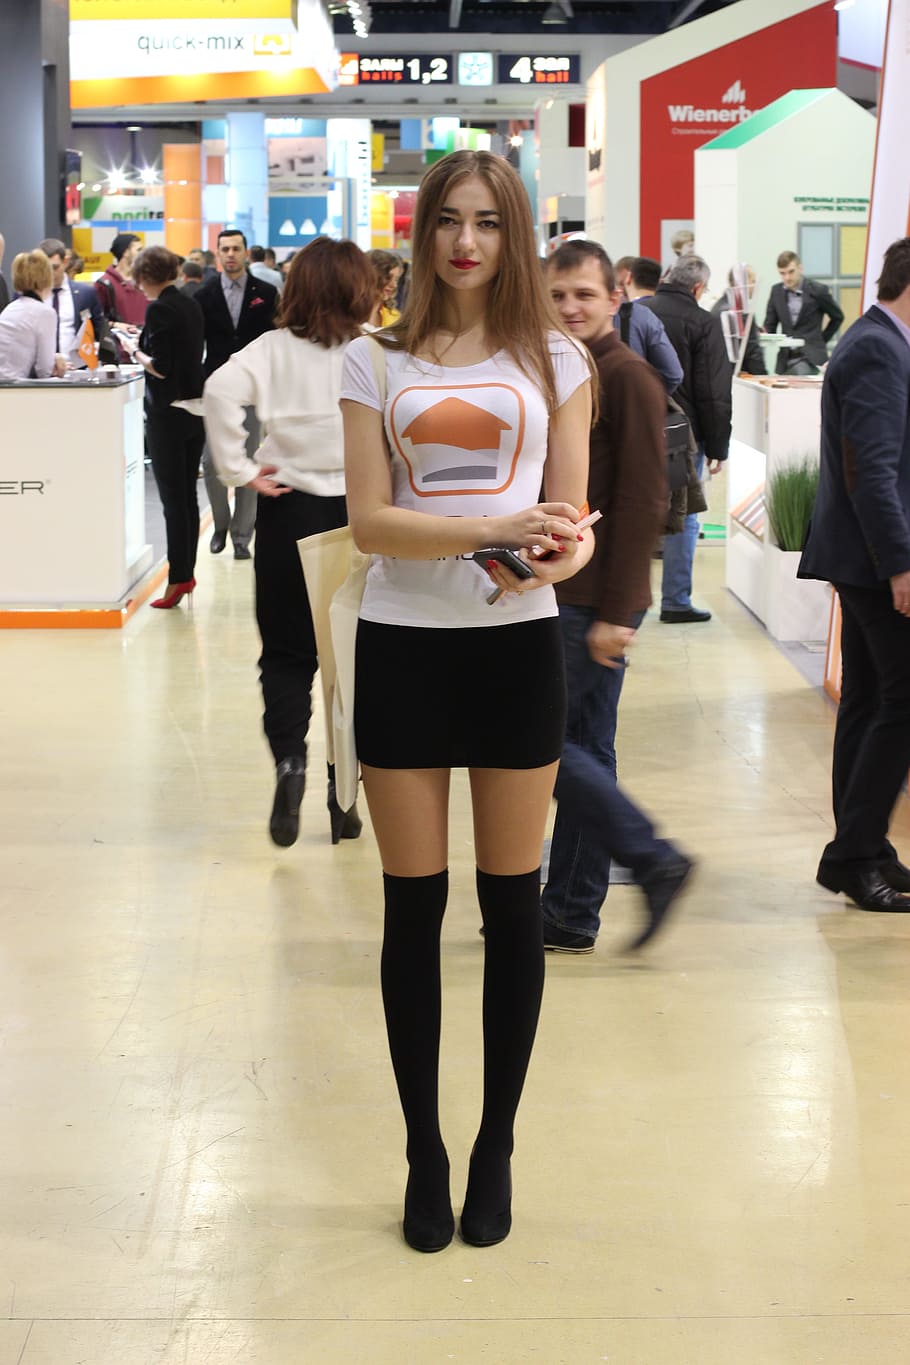 exhibition, girl, model, tall girl, distribution of leaflets, leaflet, directory, booklet, expocentre, moscow